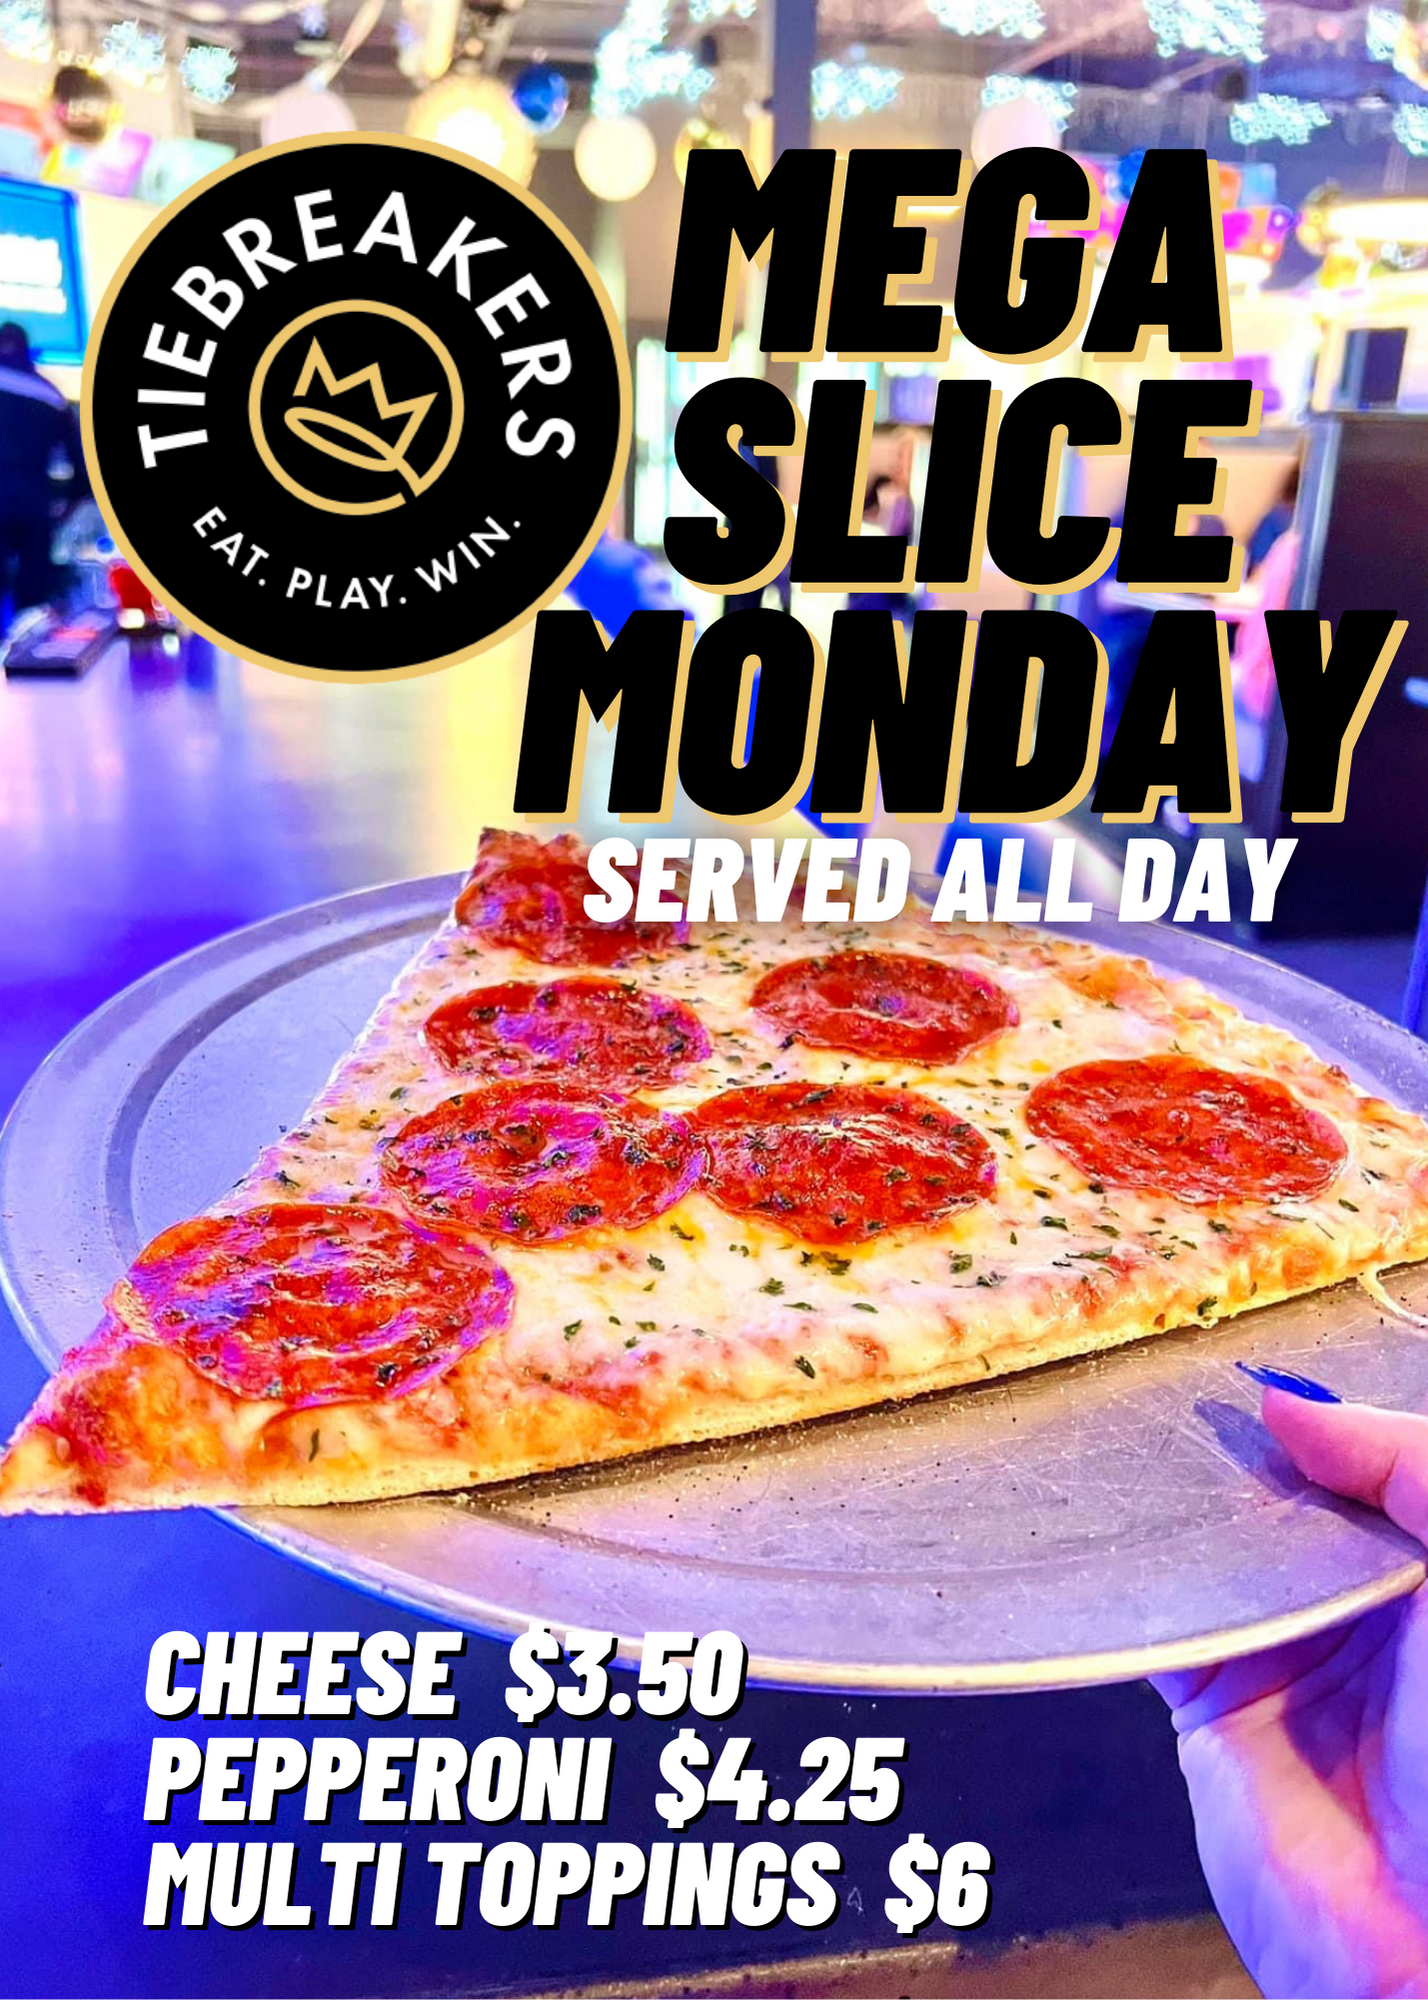 Giant slices at great prices all day on Monday